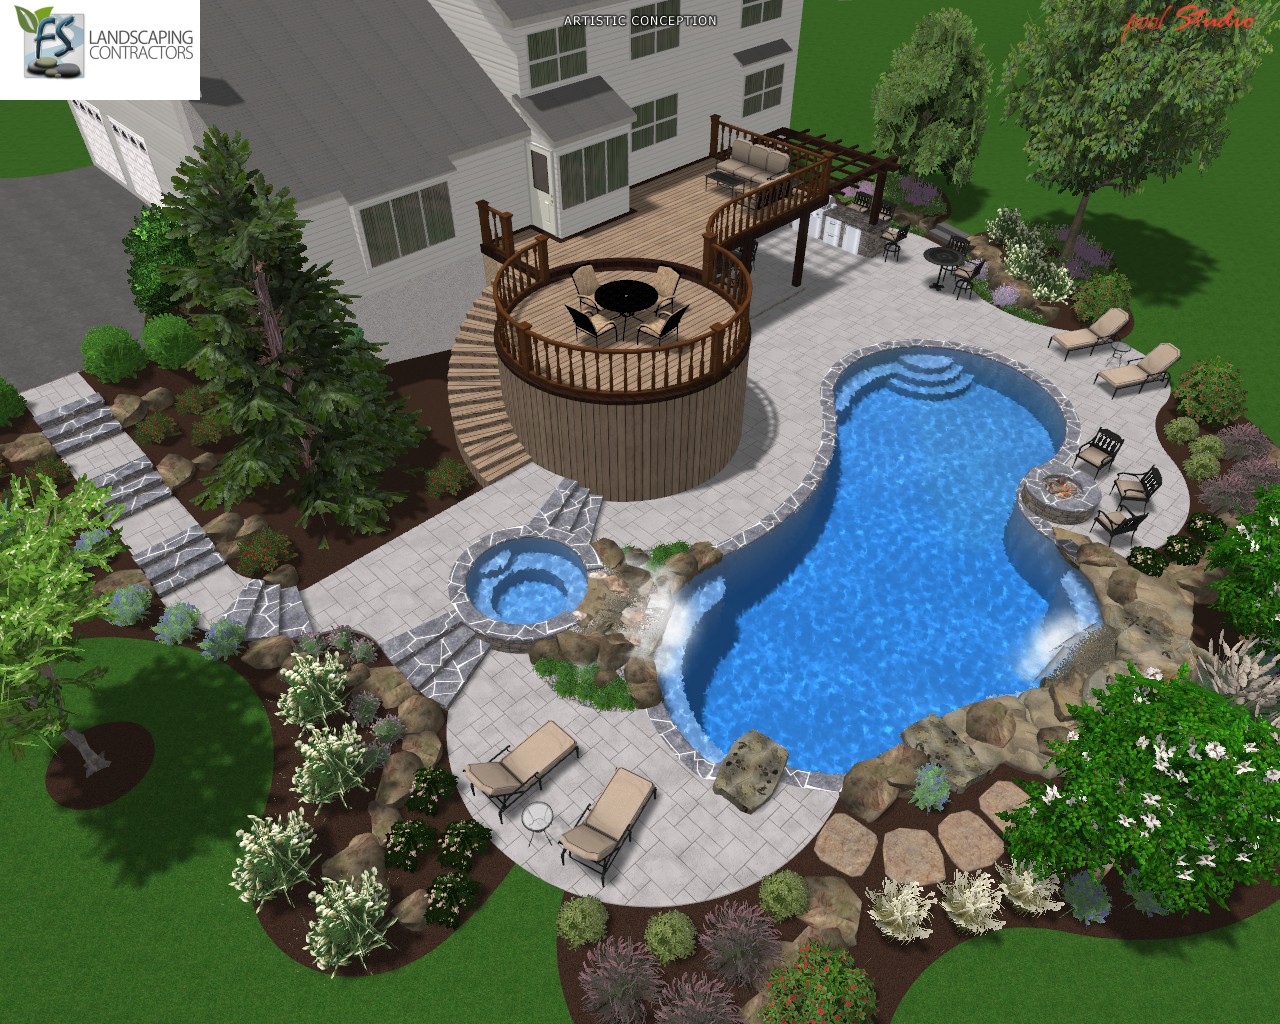 Swimming Pool & Landscape Designers - Landscaping Company ...